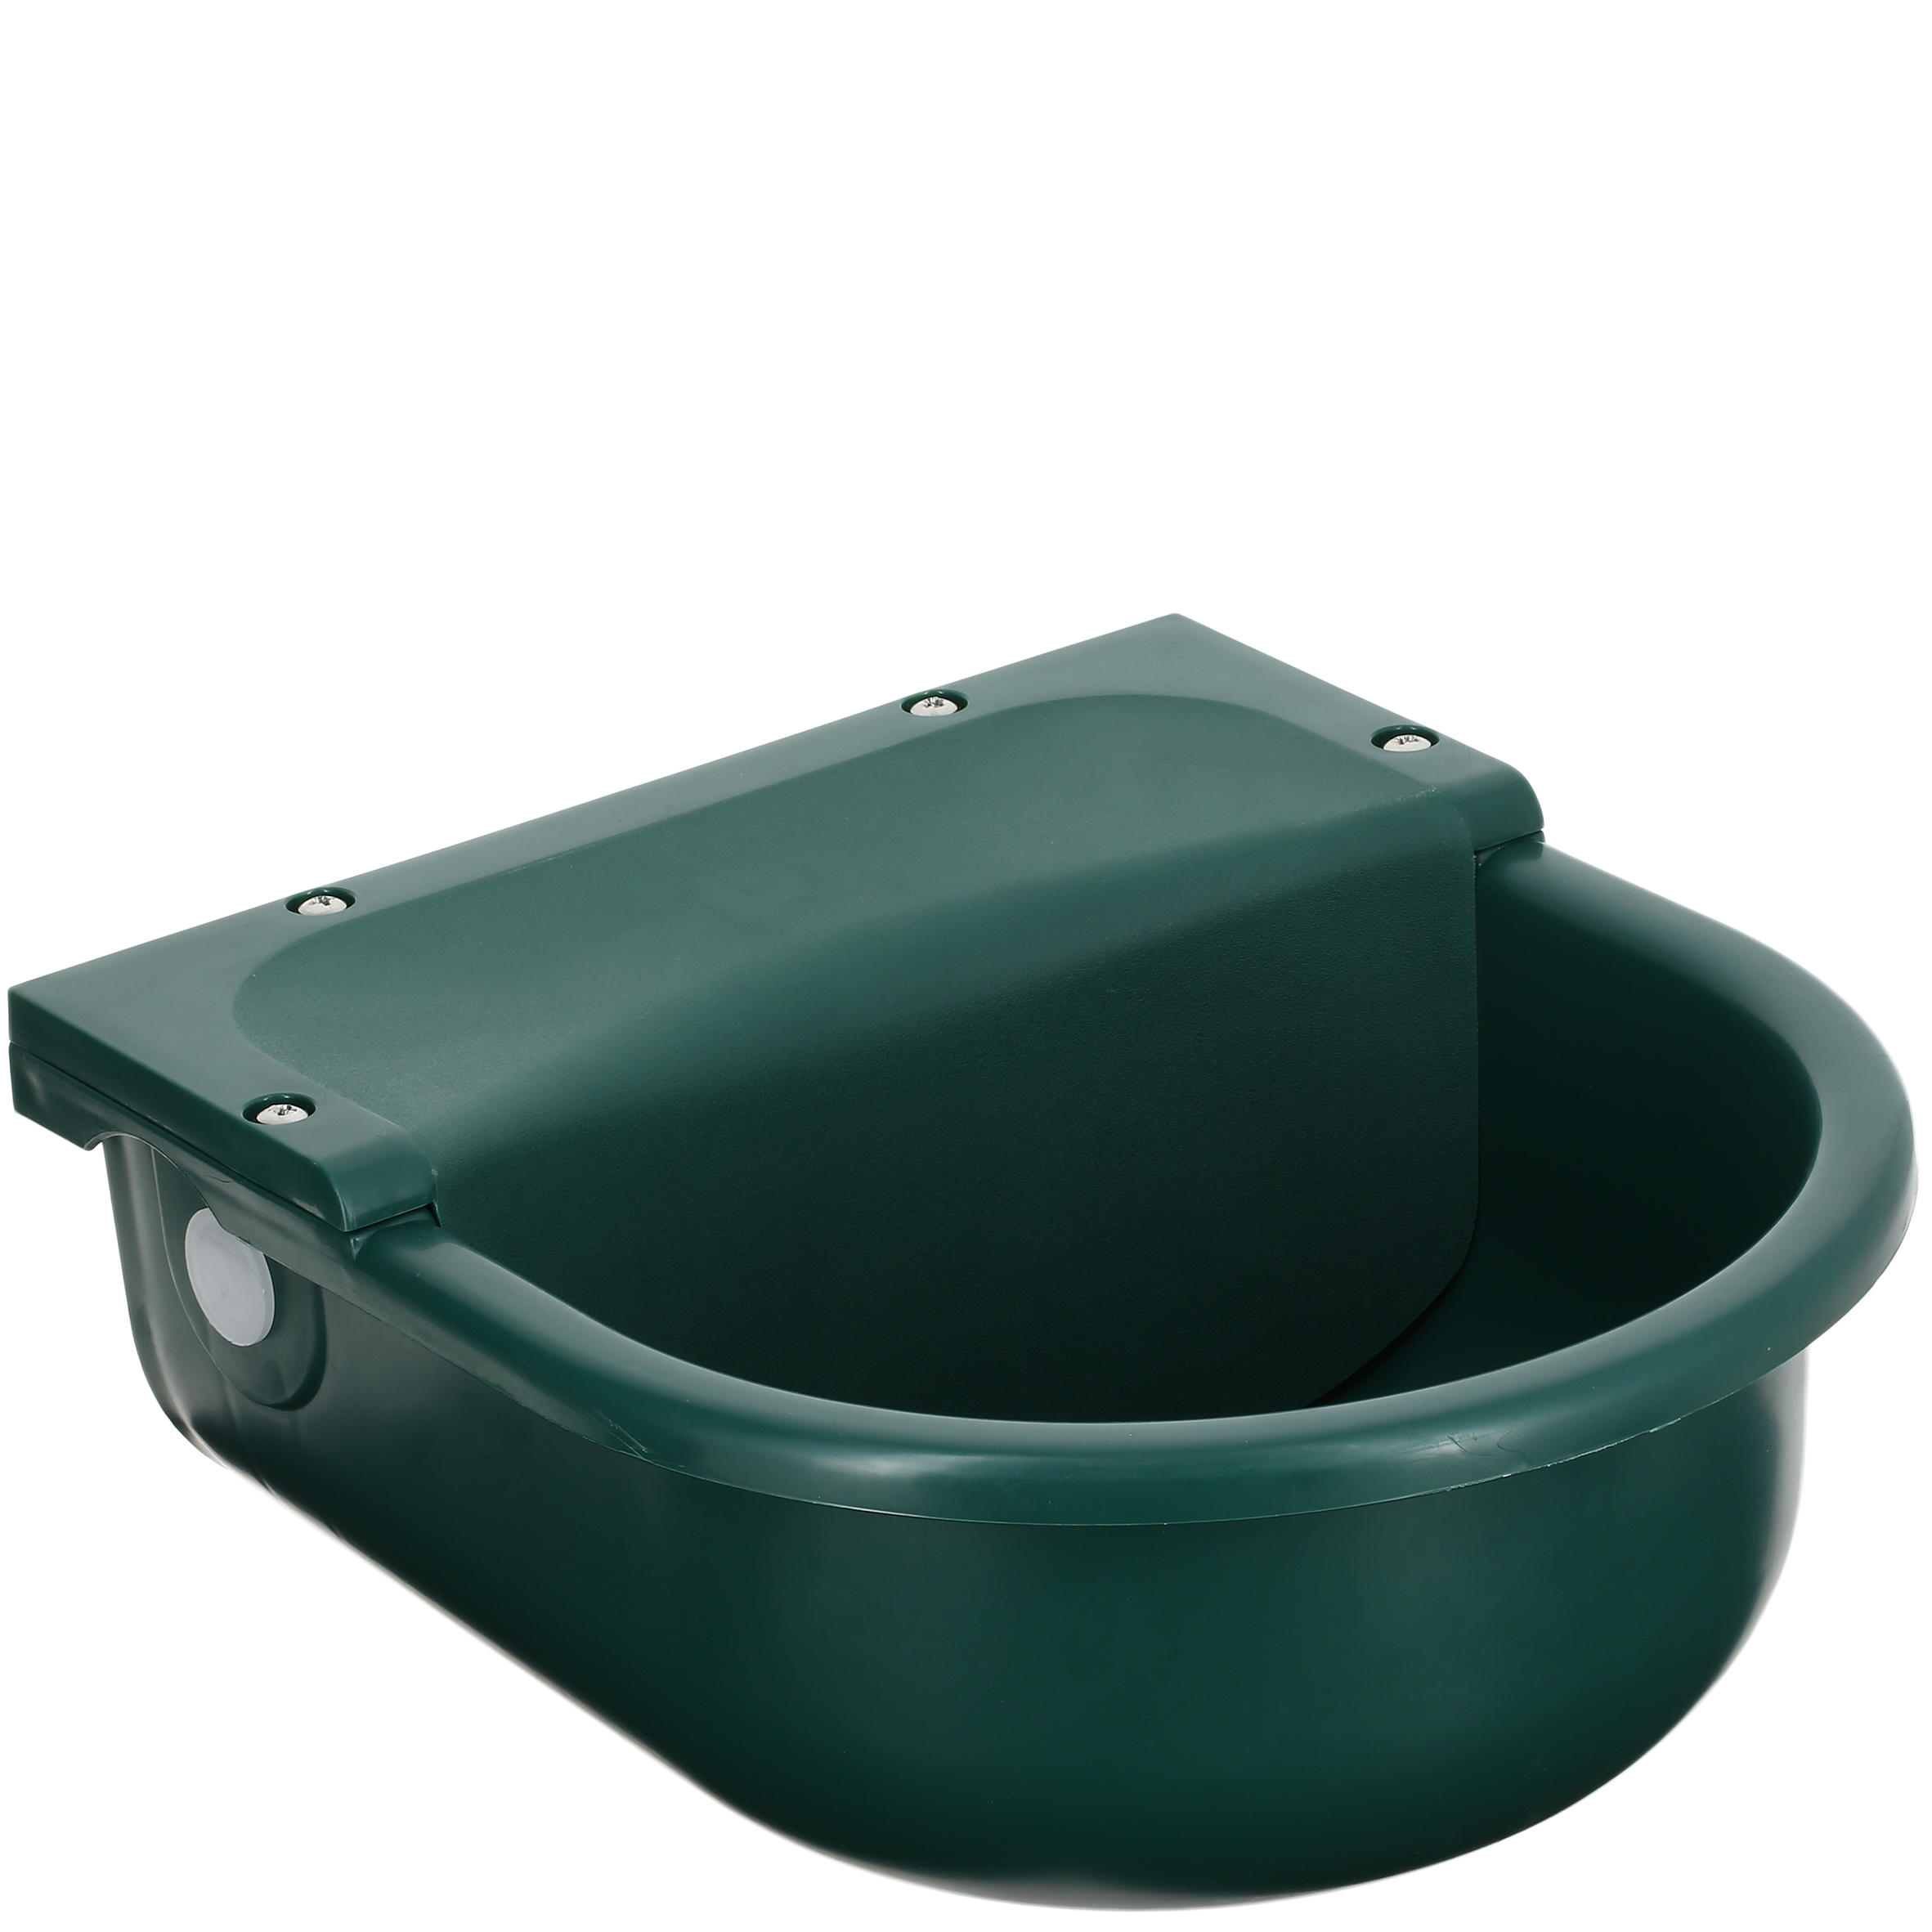 FOUGANZA Automatic Horse Riding Drinking Trough - Green